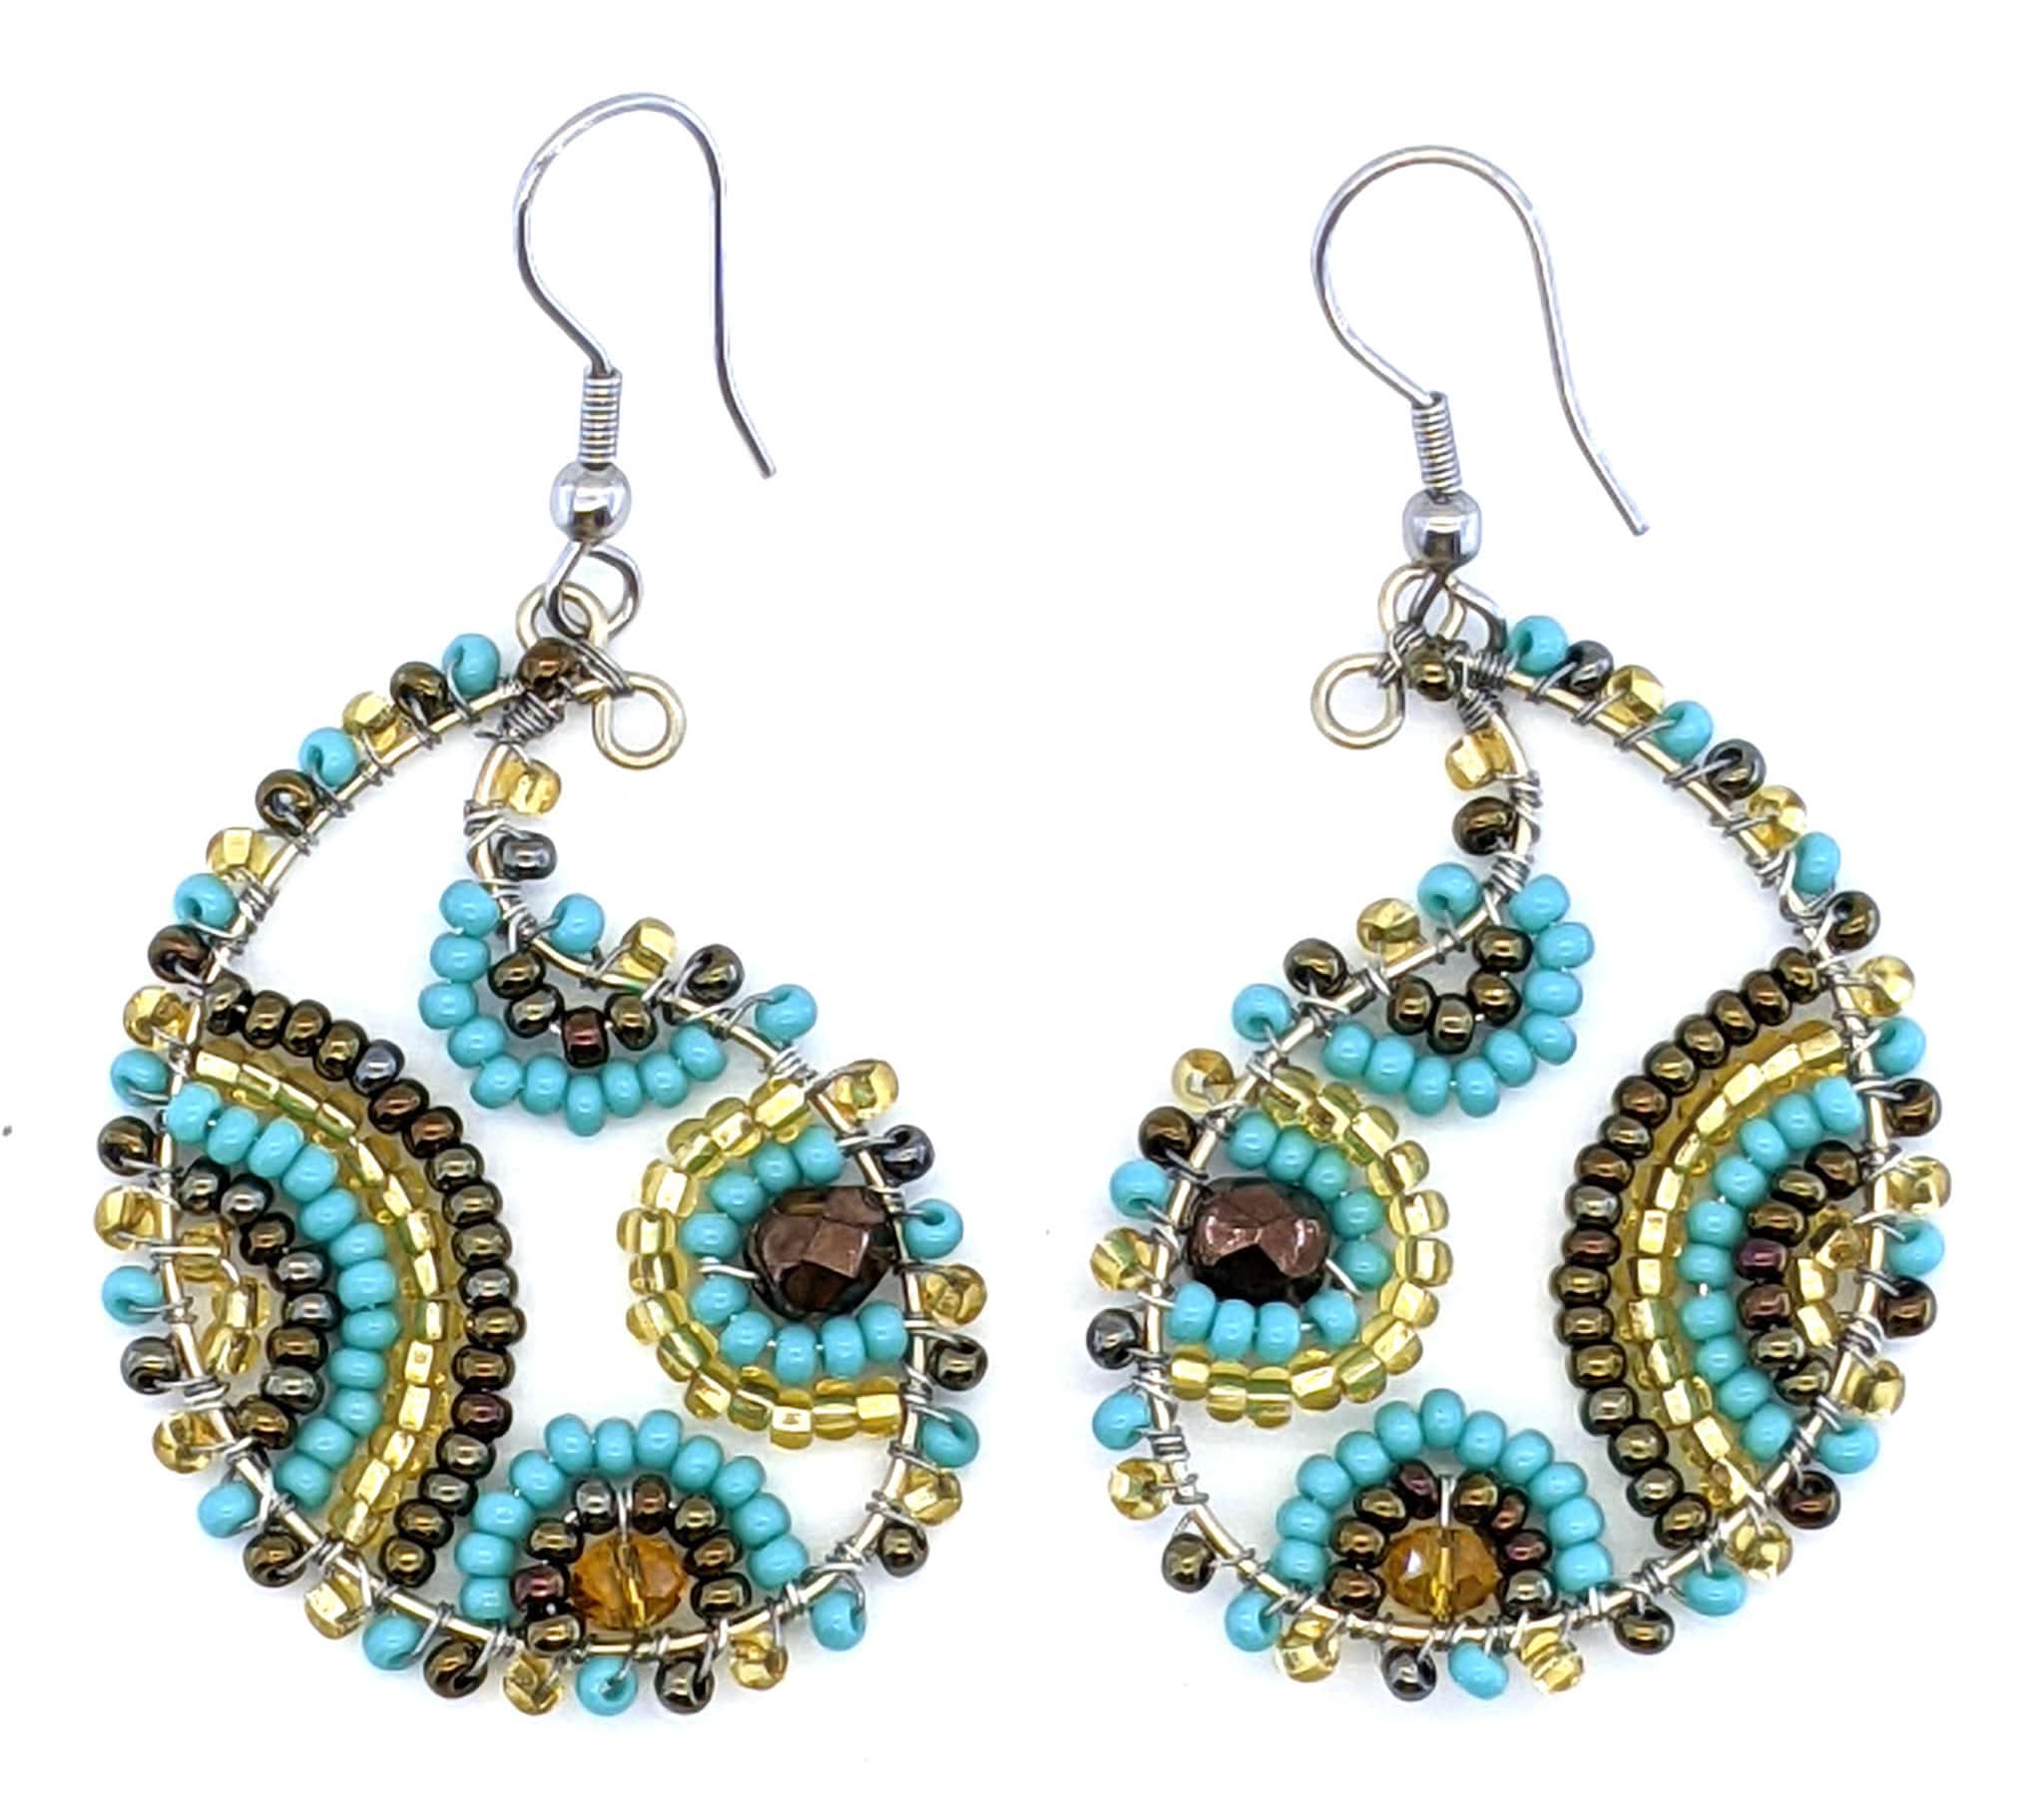 Turquoise, Copper and Gold Paisley Beaded Earrings